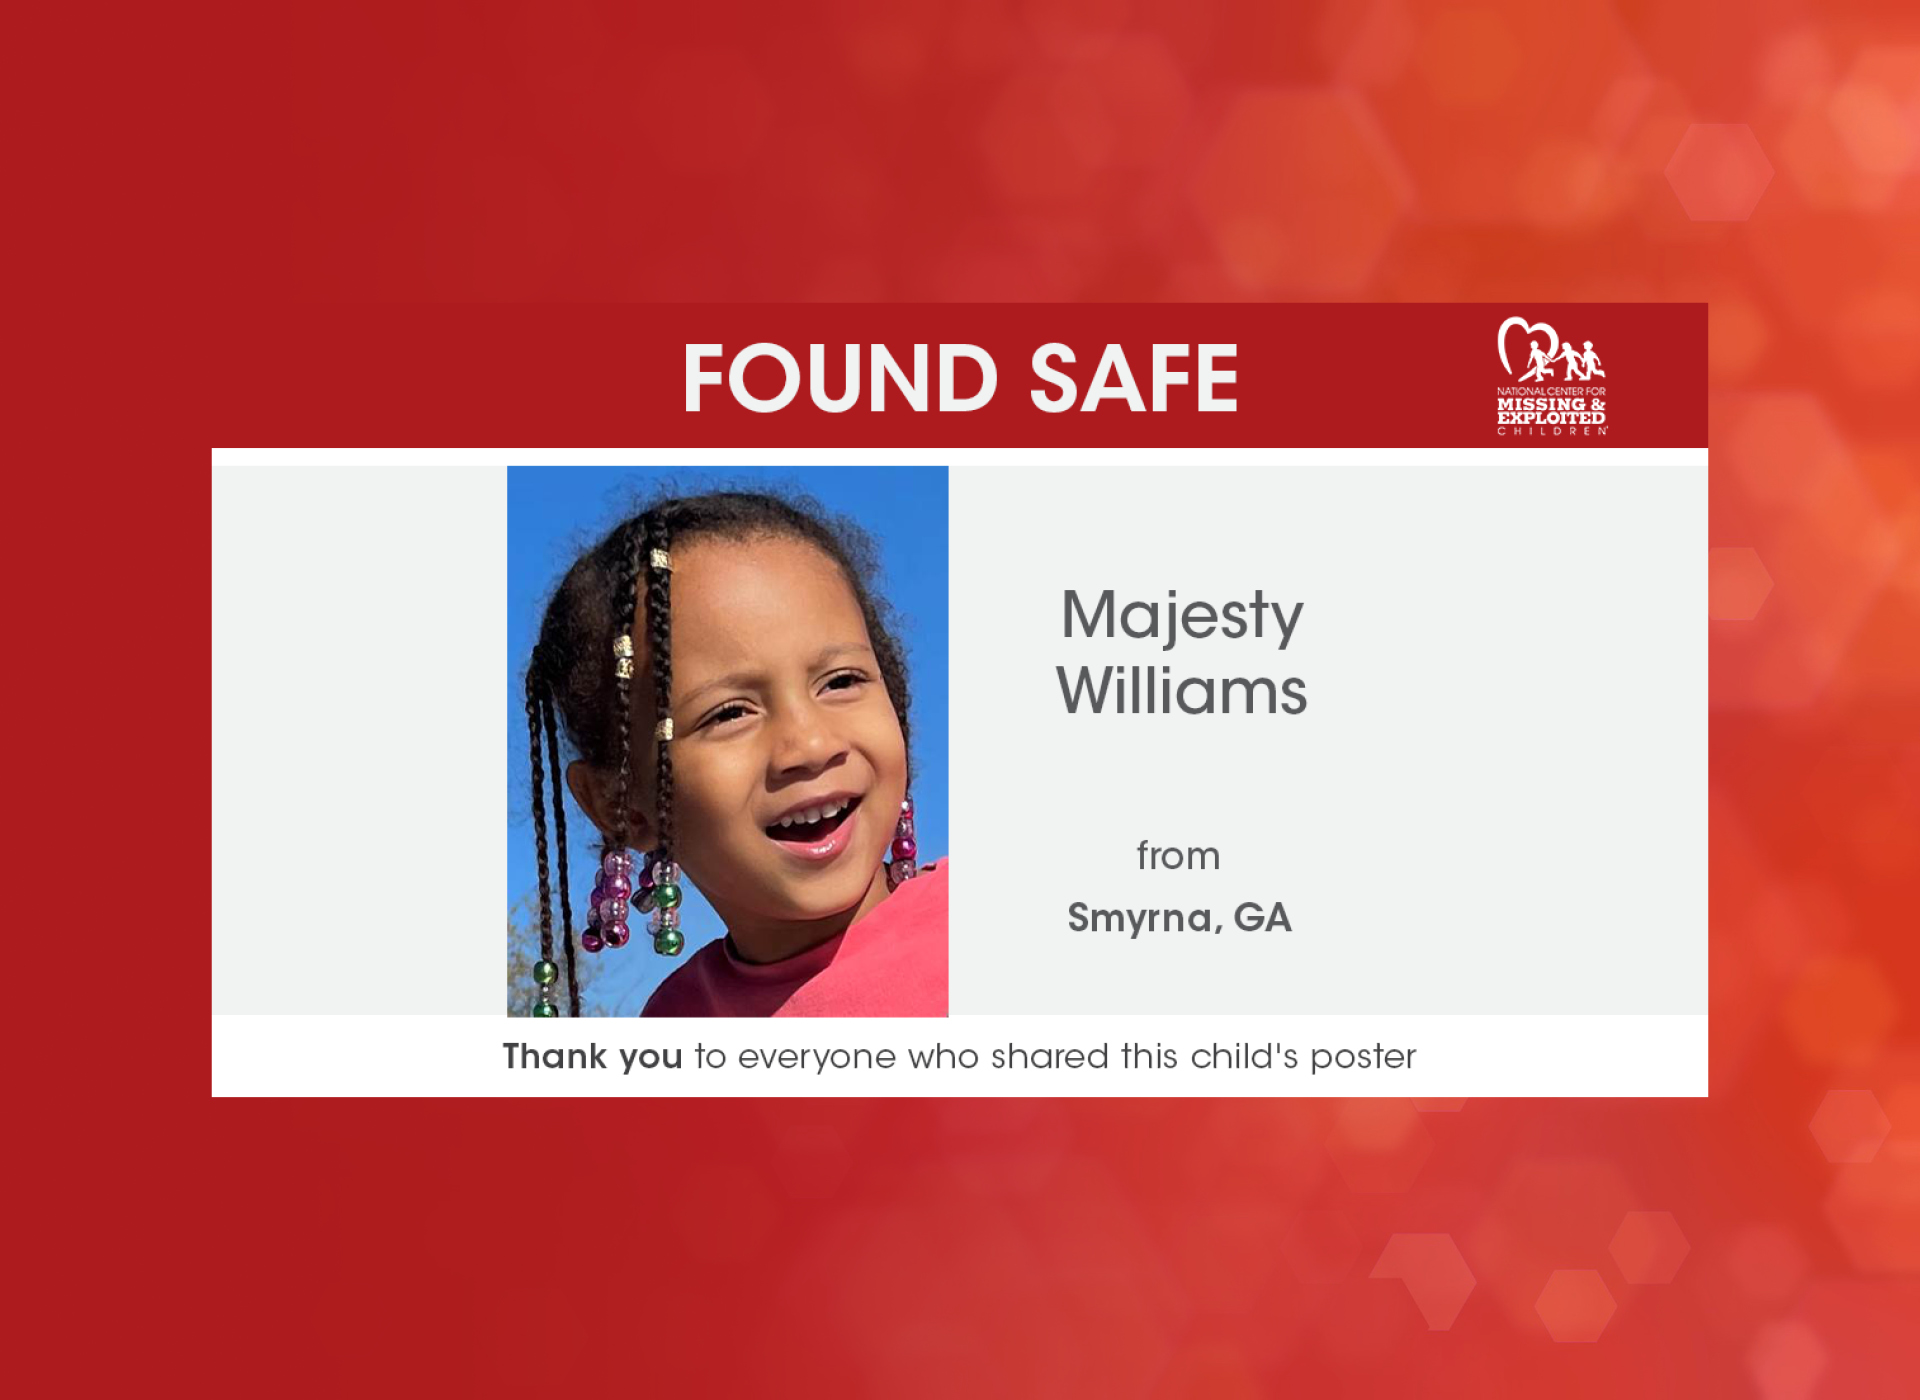 young girl, Majesty Williams is recovered